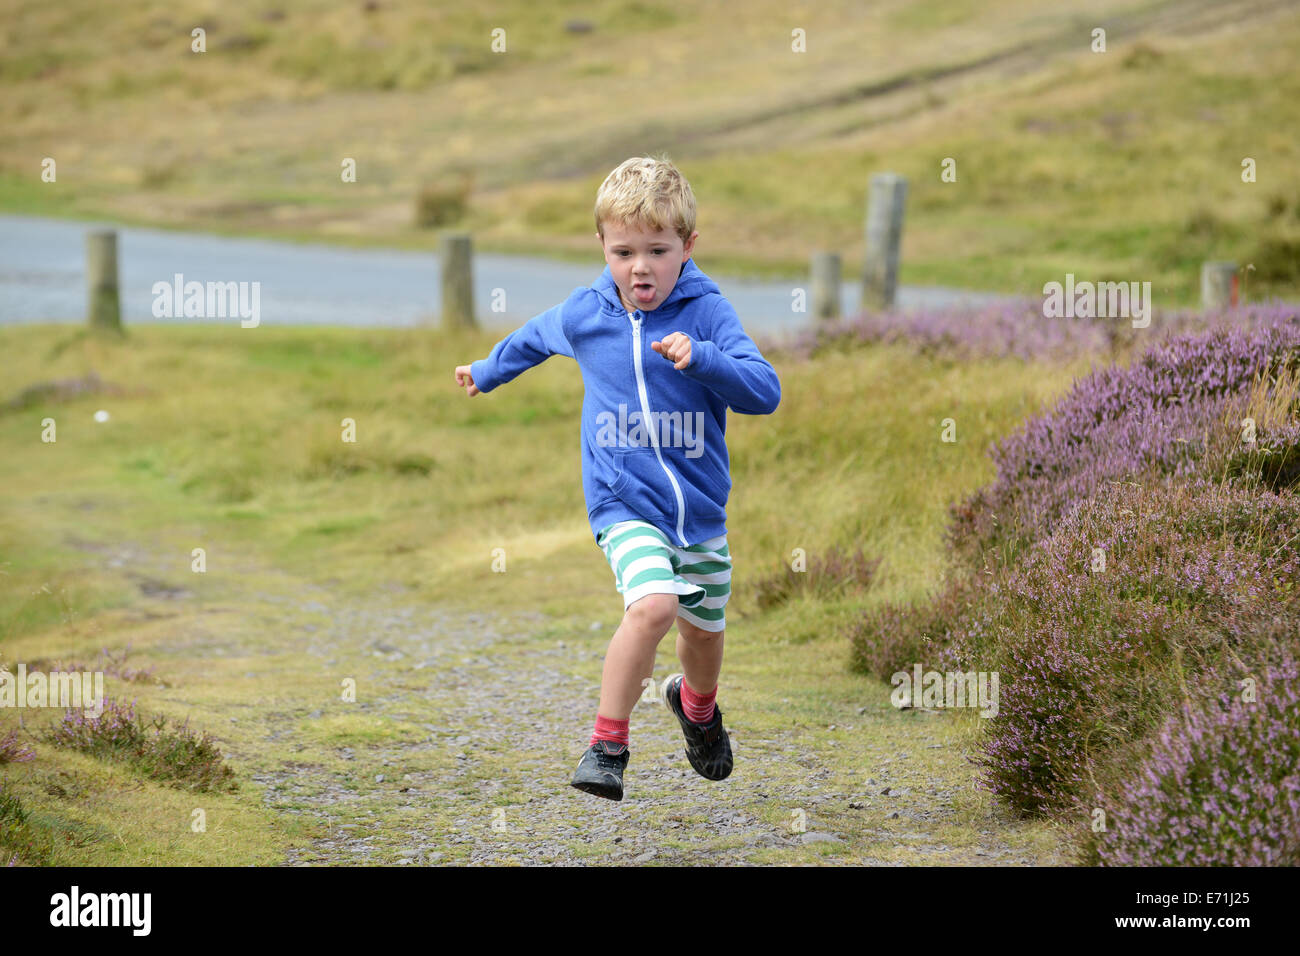 Young boy child running in countryside rural area uk Stock Photo